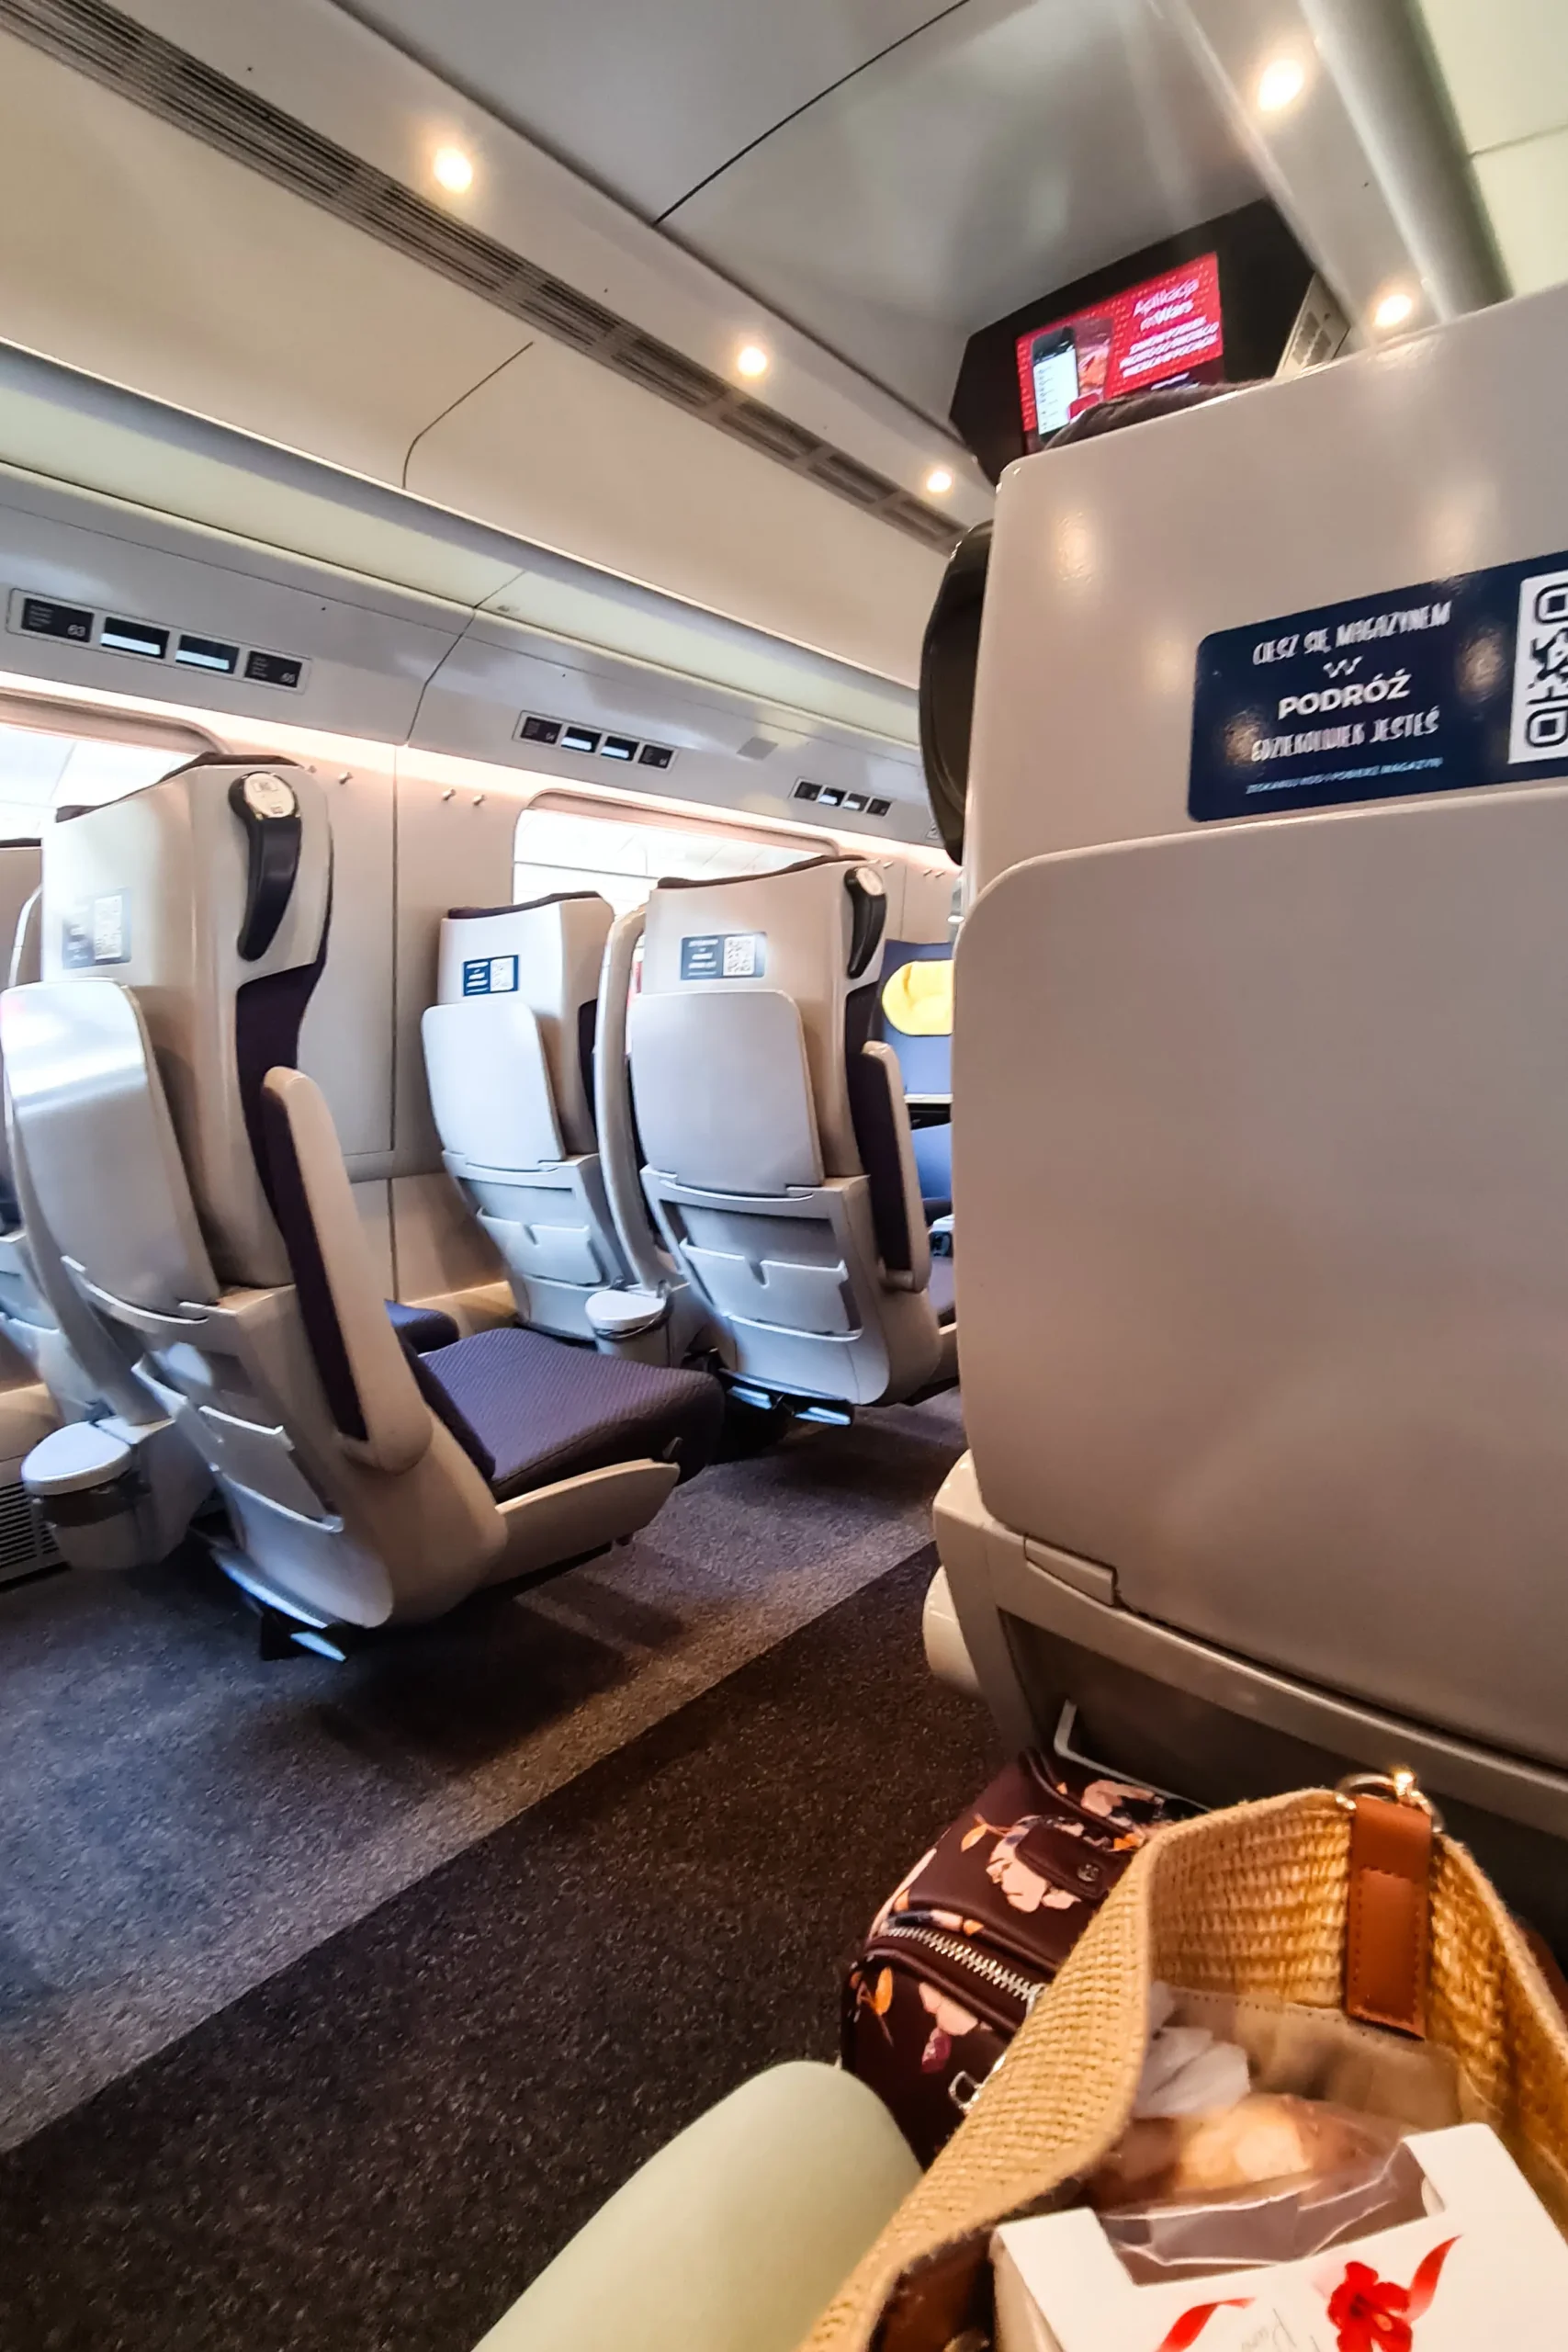 Comfortable seats inside a first-class train from Krakow to Gdansk in Poland.